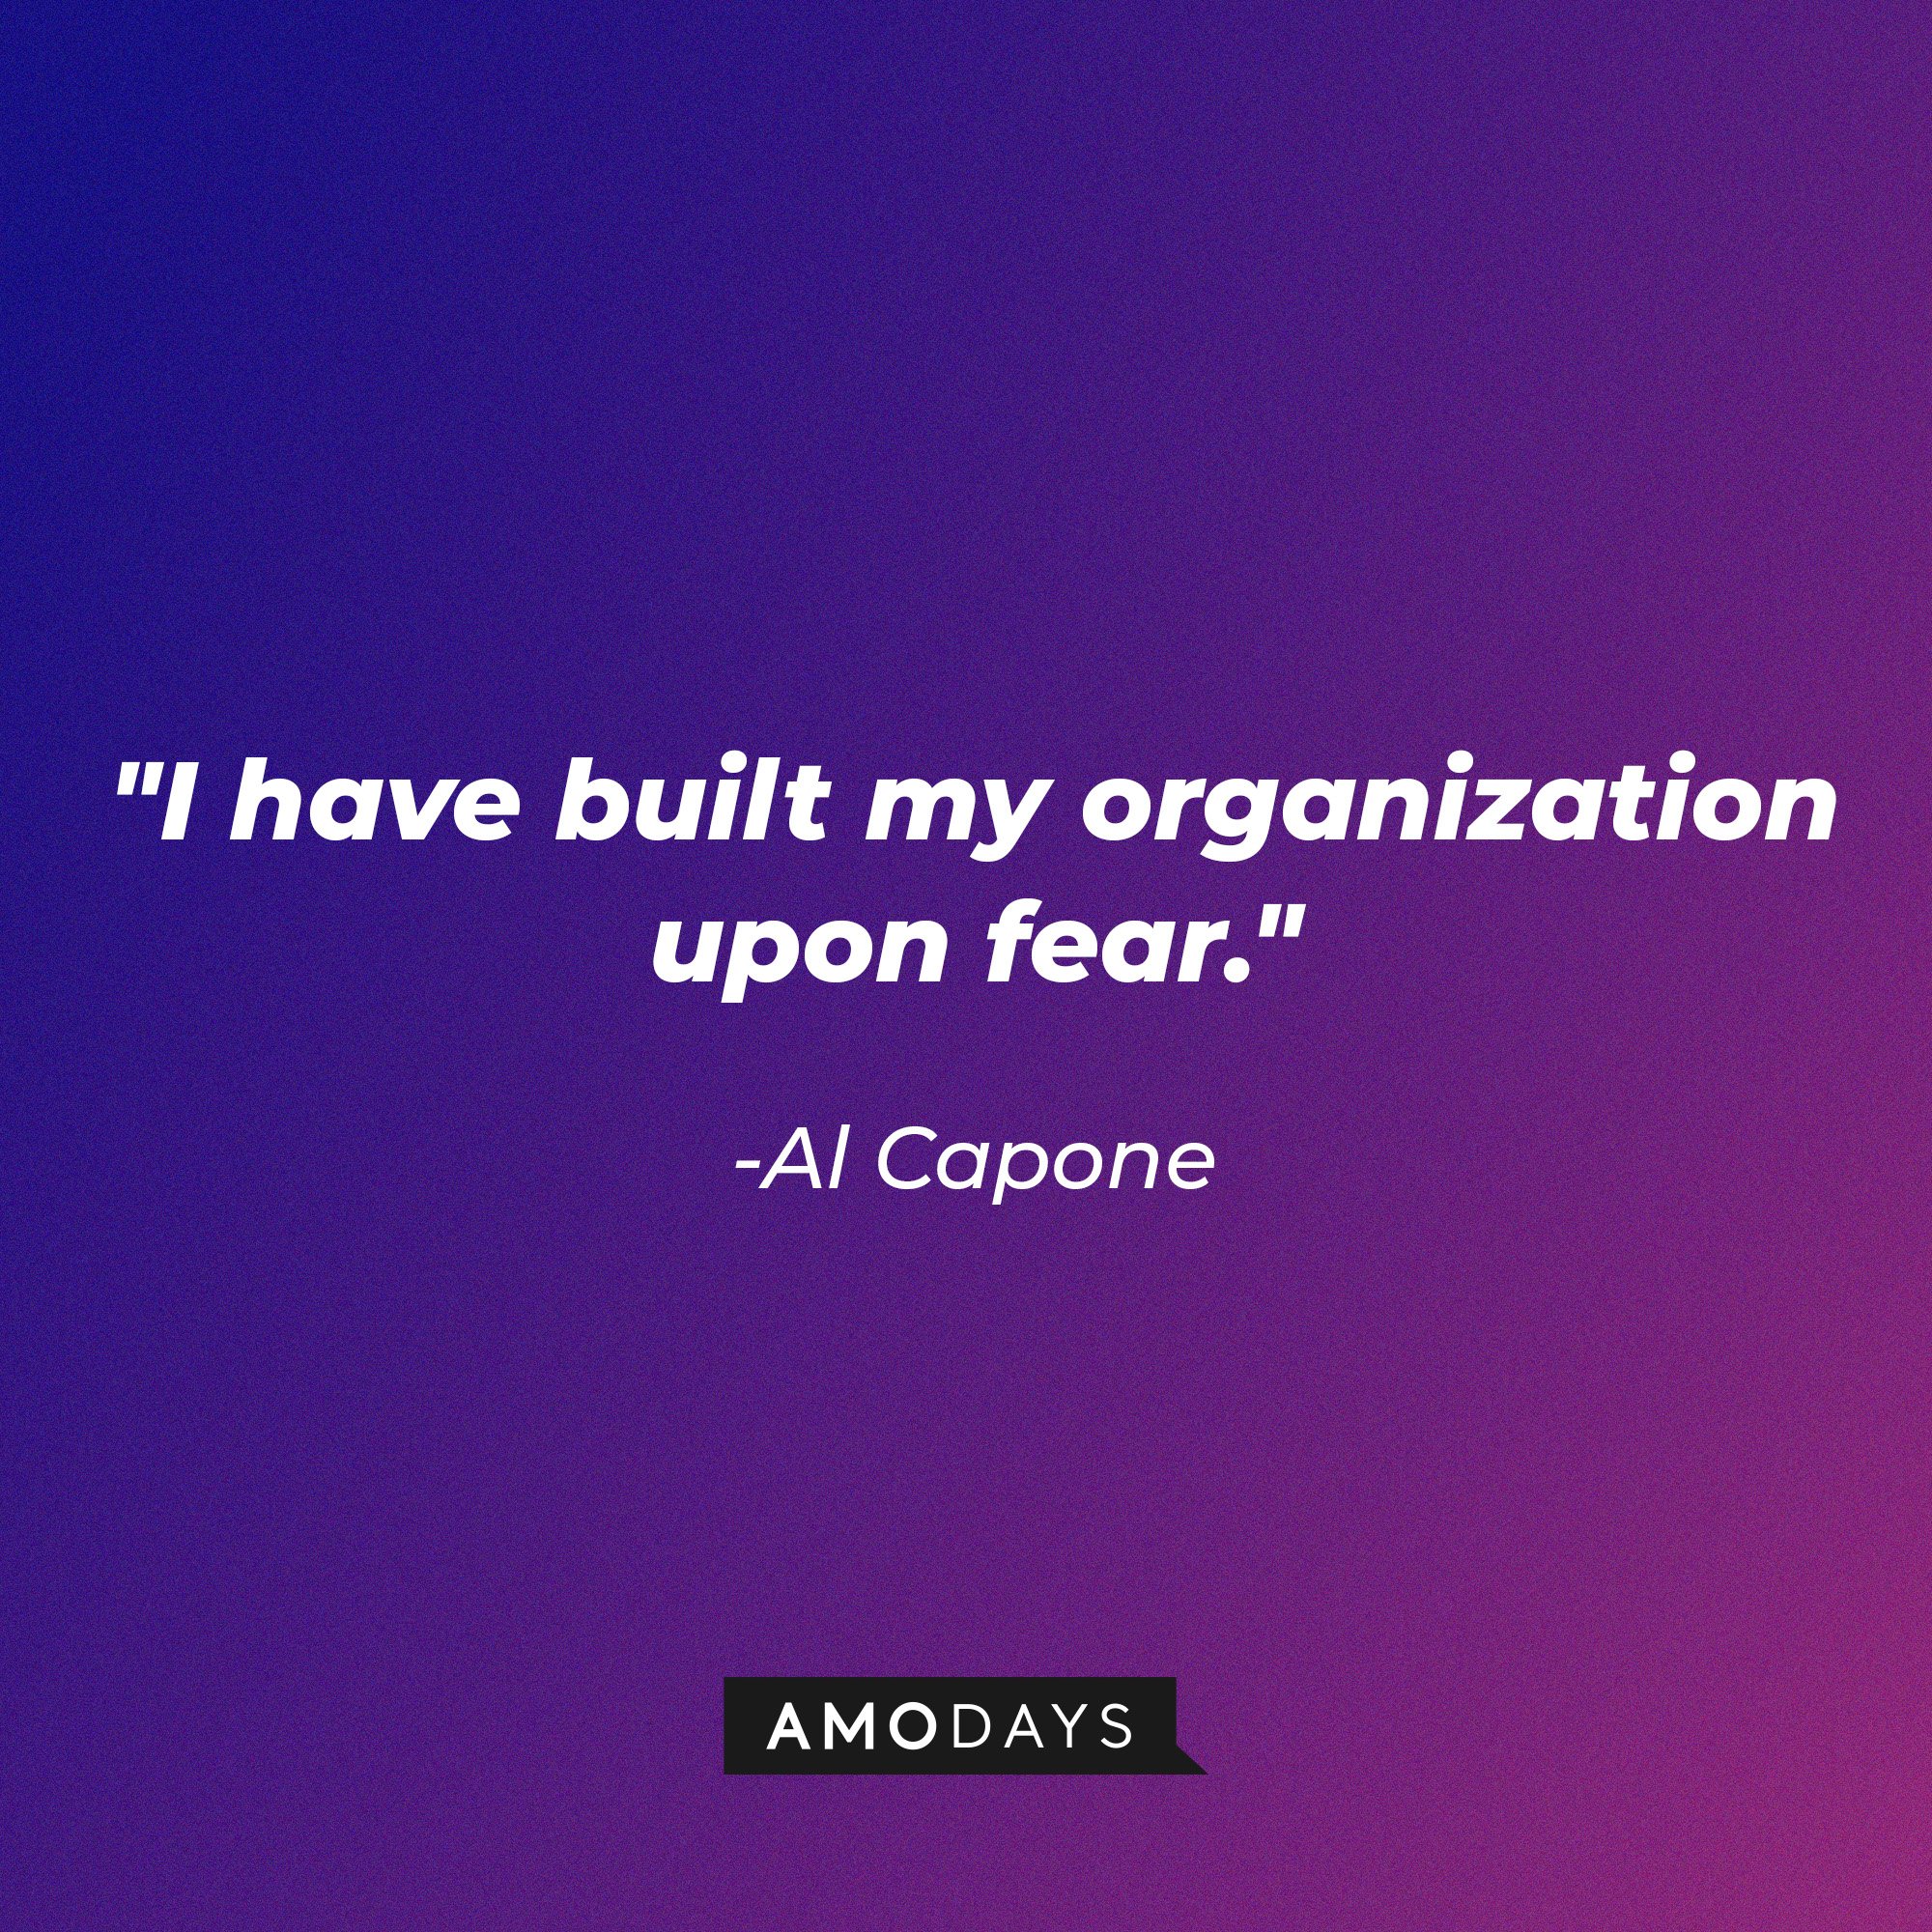 Al Capone’s quote: "I have built my organization upon fear." | Image: AmoDays